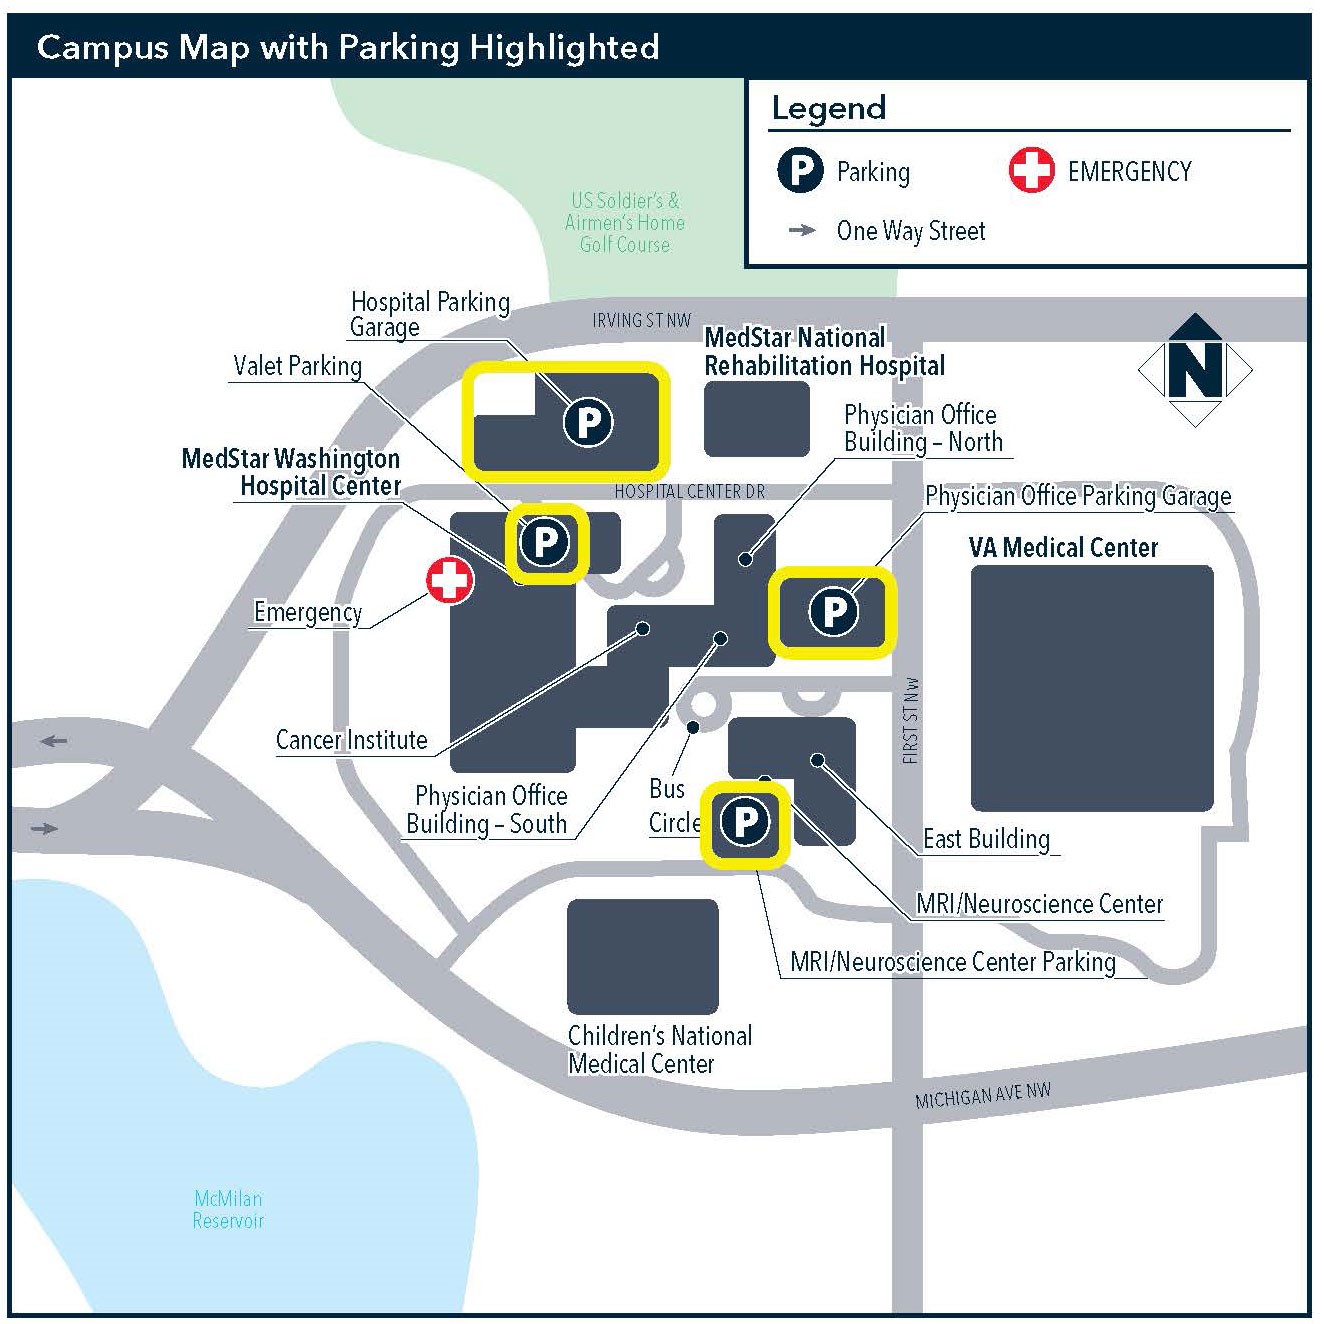 mwhc-ext-campus-map_parking-highlighted_zoom-nov-2015